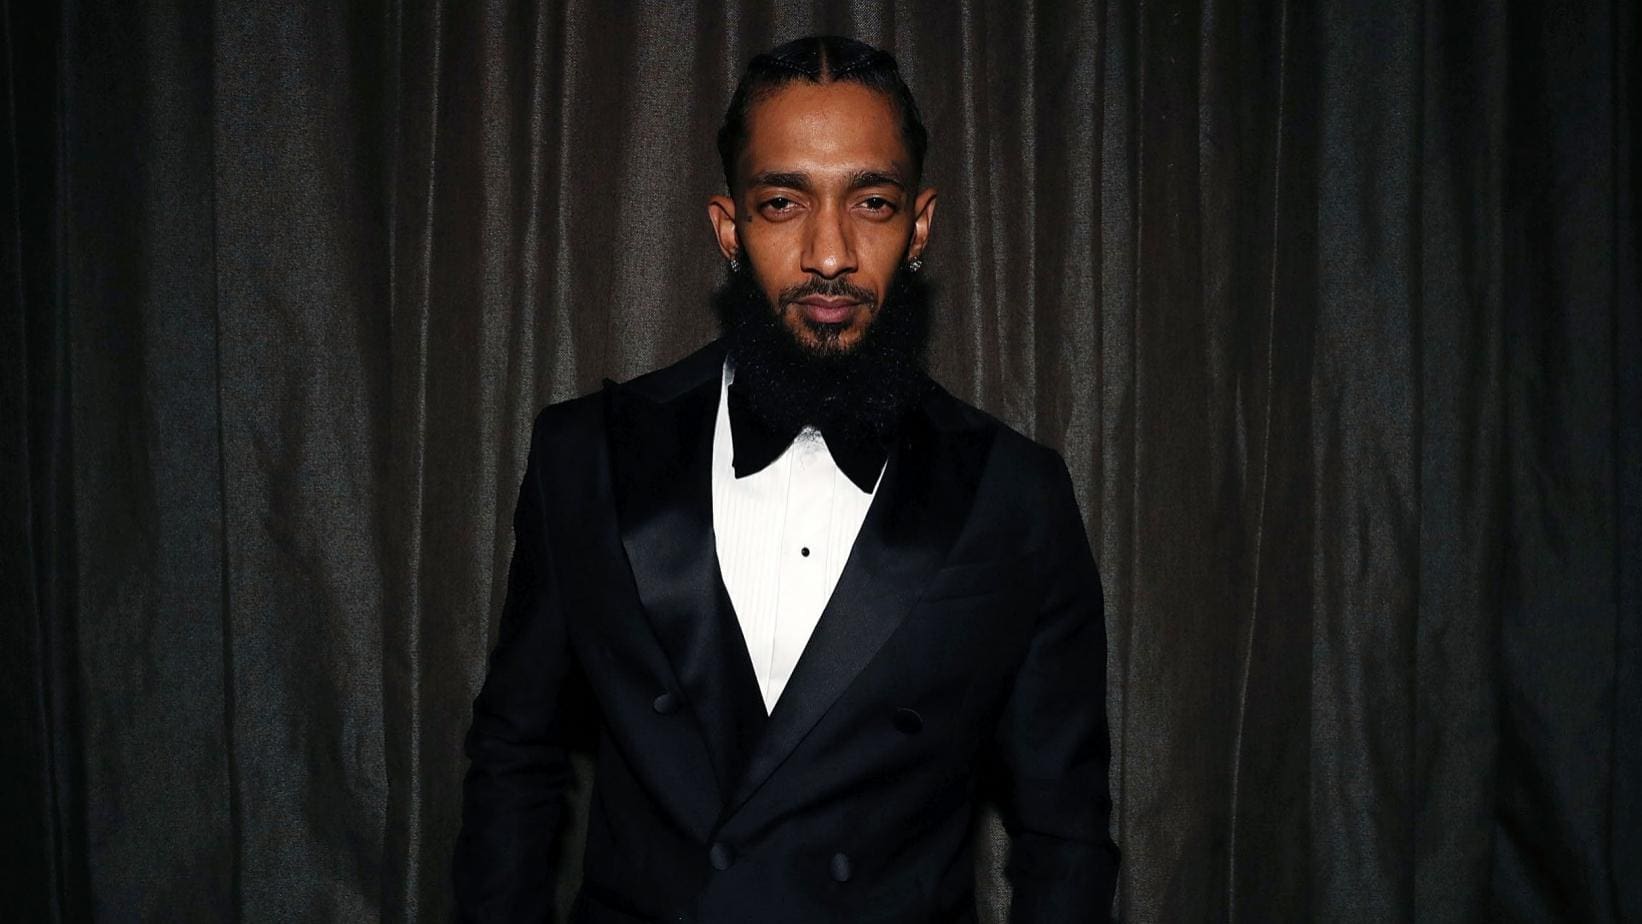 Free Tickets To Nipsey Hussle's Memorial Service, Resold Online! T.I., Karrueche Tran And More, Bash Such A Monstrosity